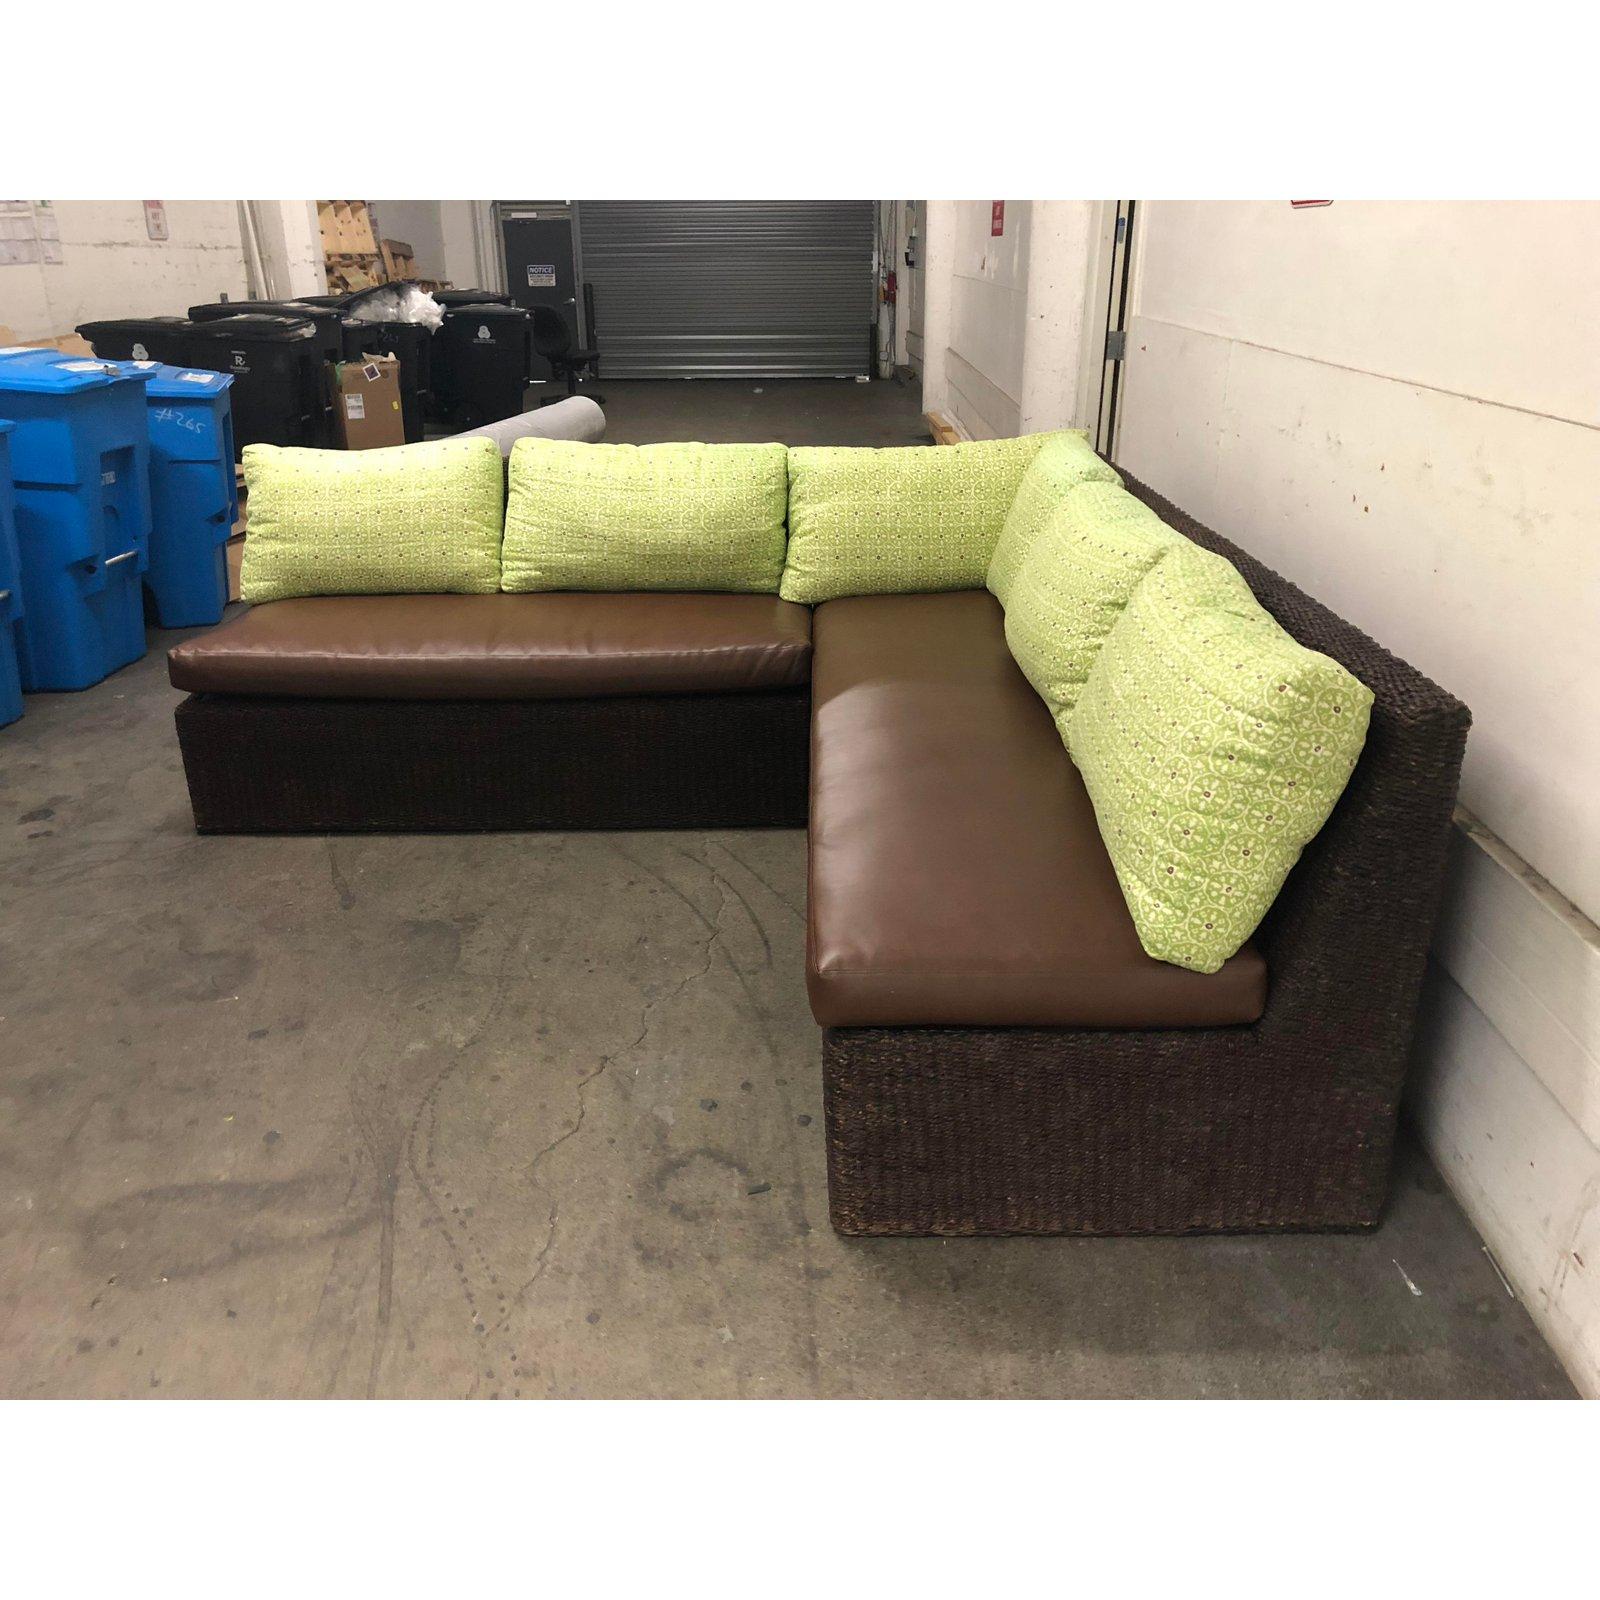 A two-part sectional from Walter's Wicker Works. A sloped back, open ends and firm leather seating comprise the basic structure of this sectional. Included are green wool canvas blend pillows with a sister parish style repeating royal seal design in